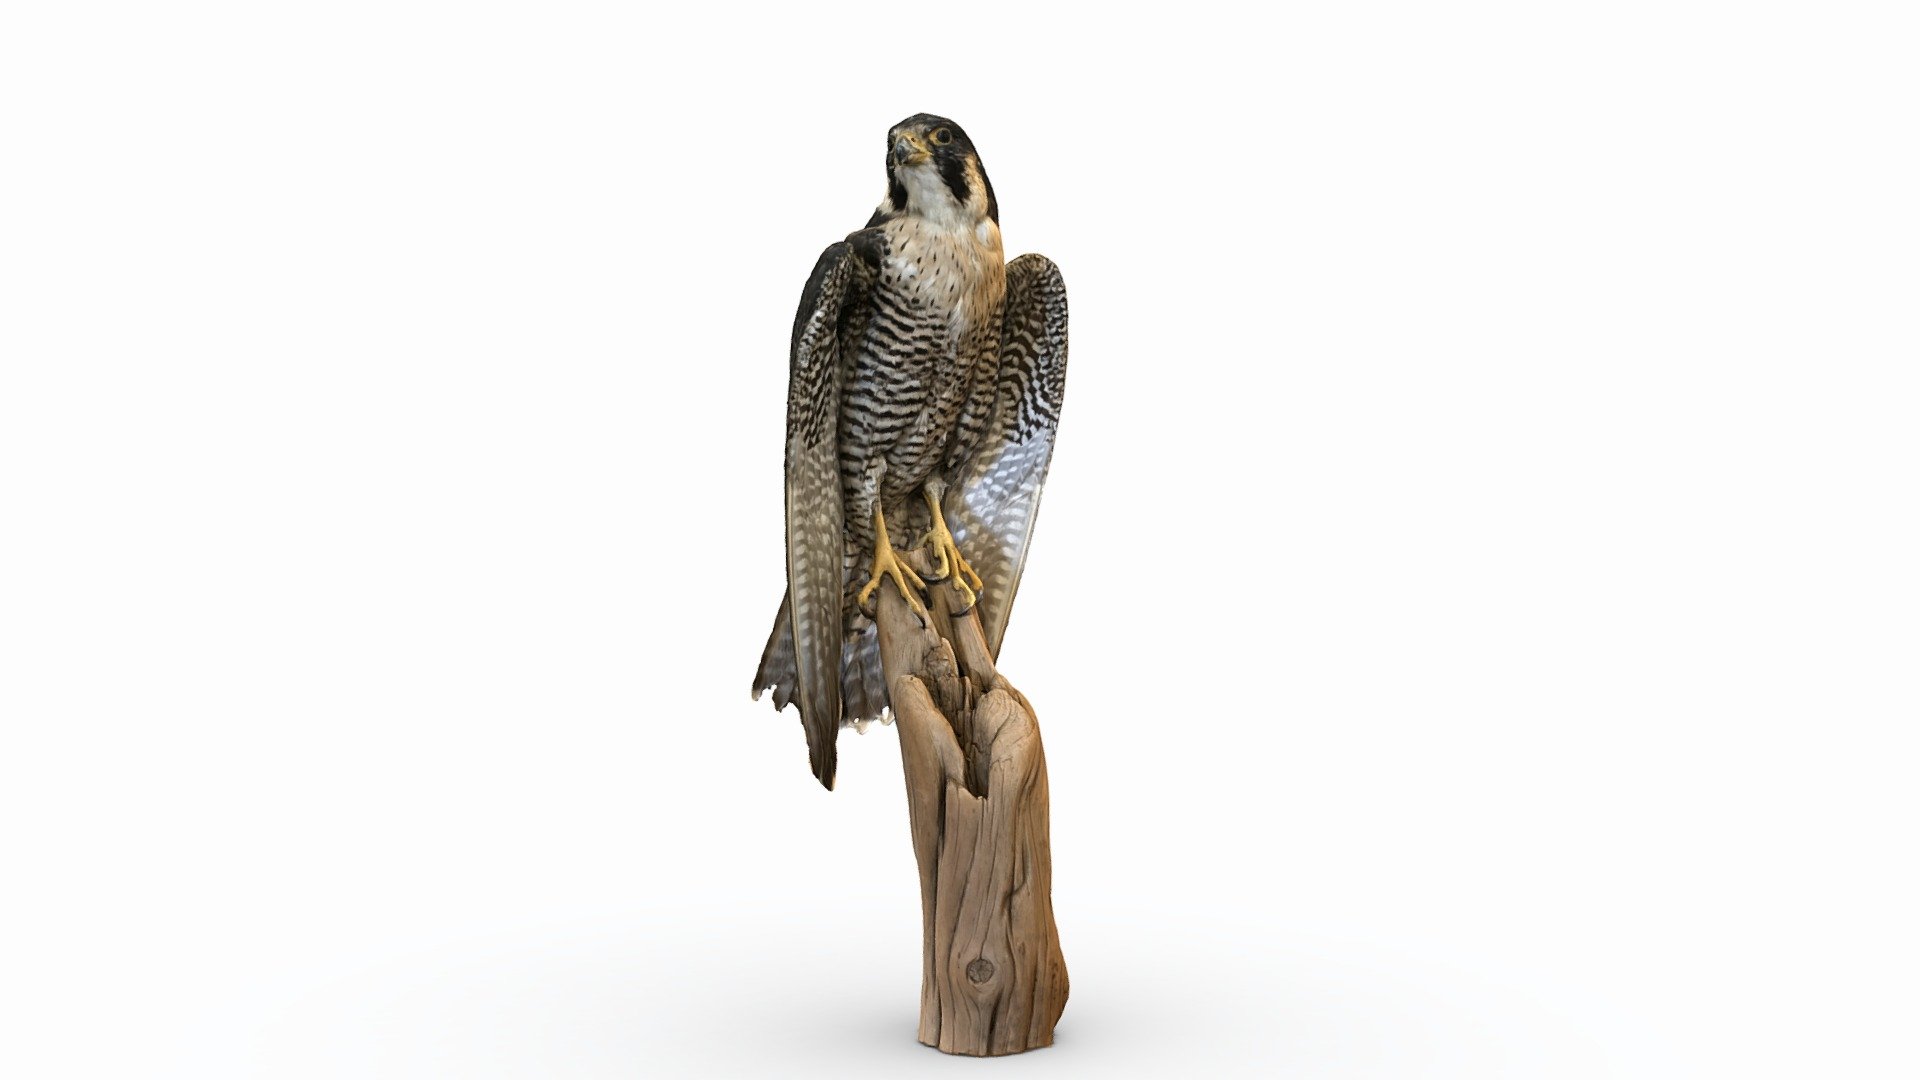 On a visit to the Elkhorn Slough National Estuarine Research Reserve today, I was kindly allowed to take some photos of a peregrine falcon that they had on display. Check out their website to learn more about the work that they're doing!

Created using 115 iPhone 7 photos 3d model